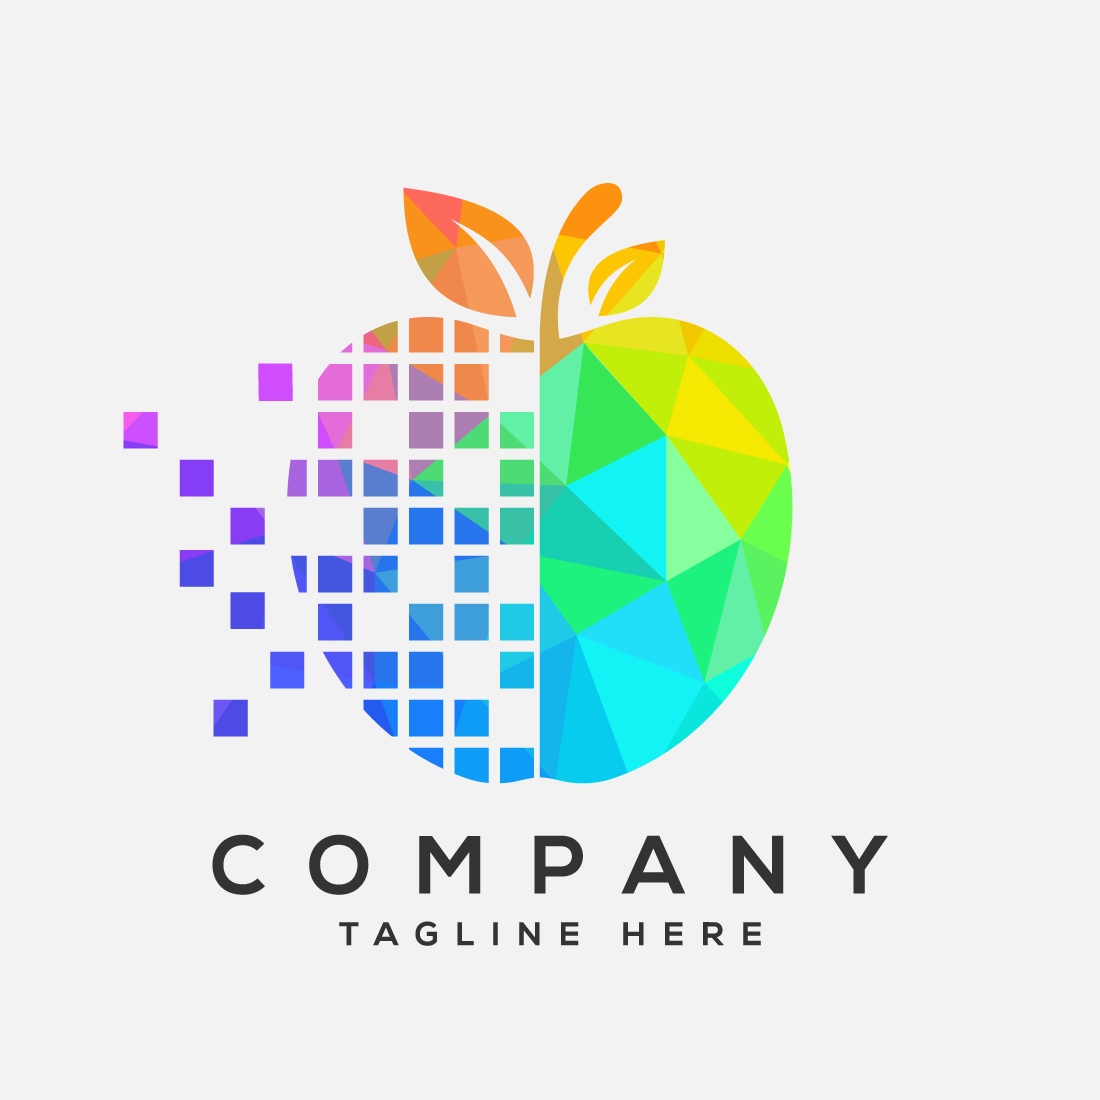 Low poly style apple pixel or data logo sign symbol in flat style on white background preview image.